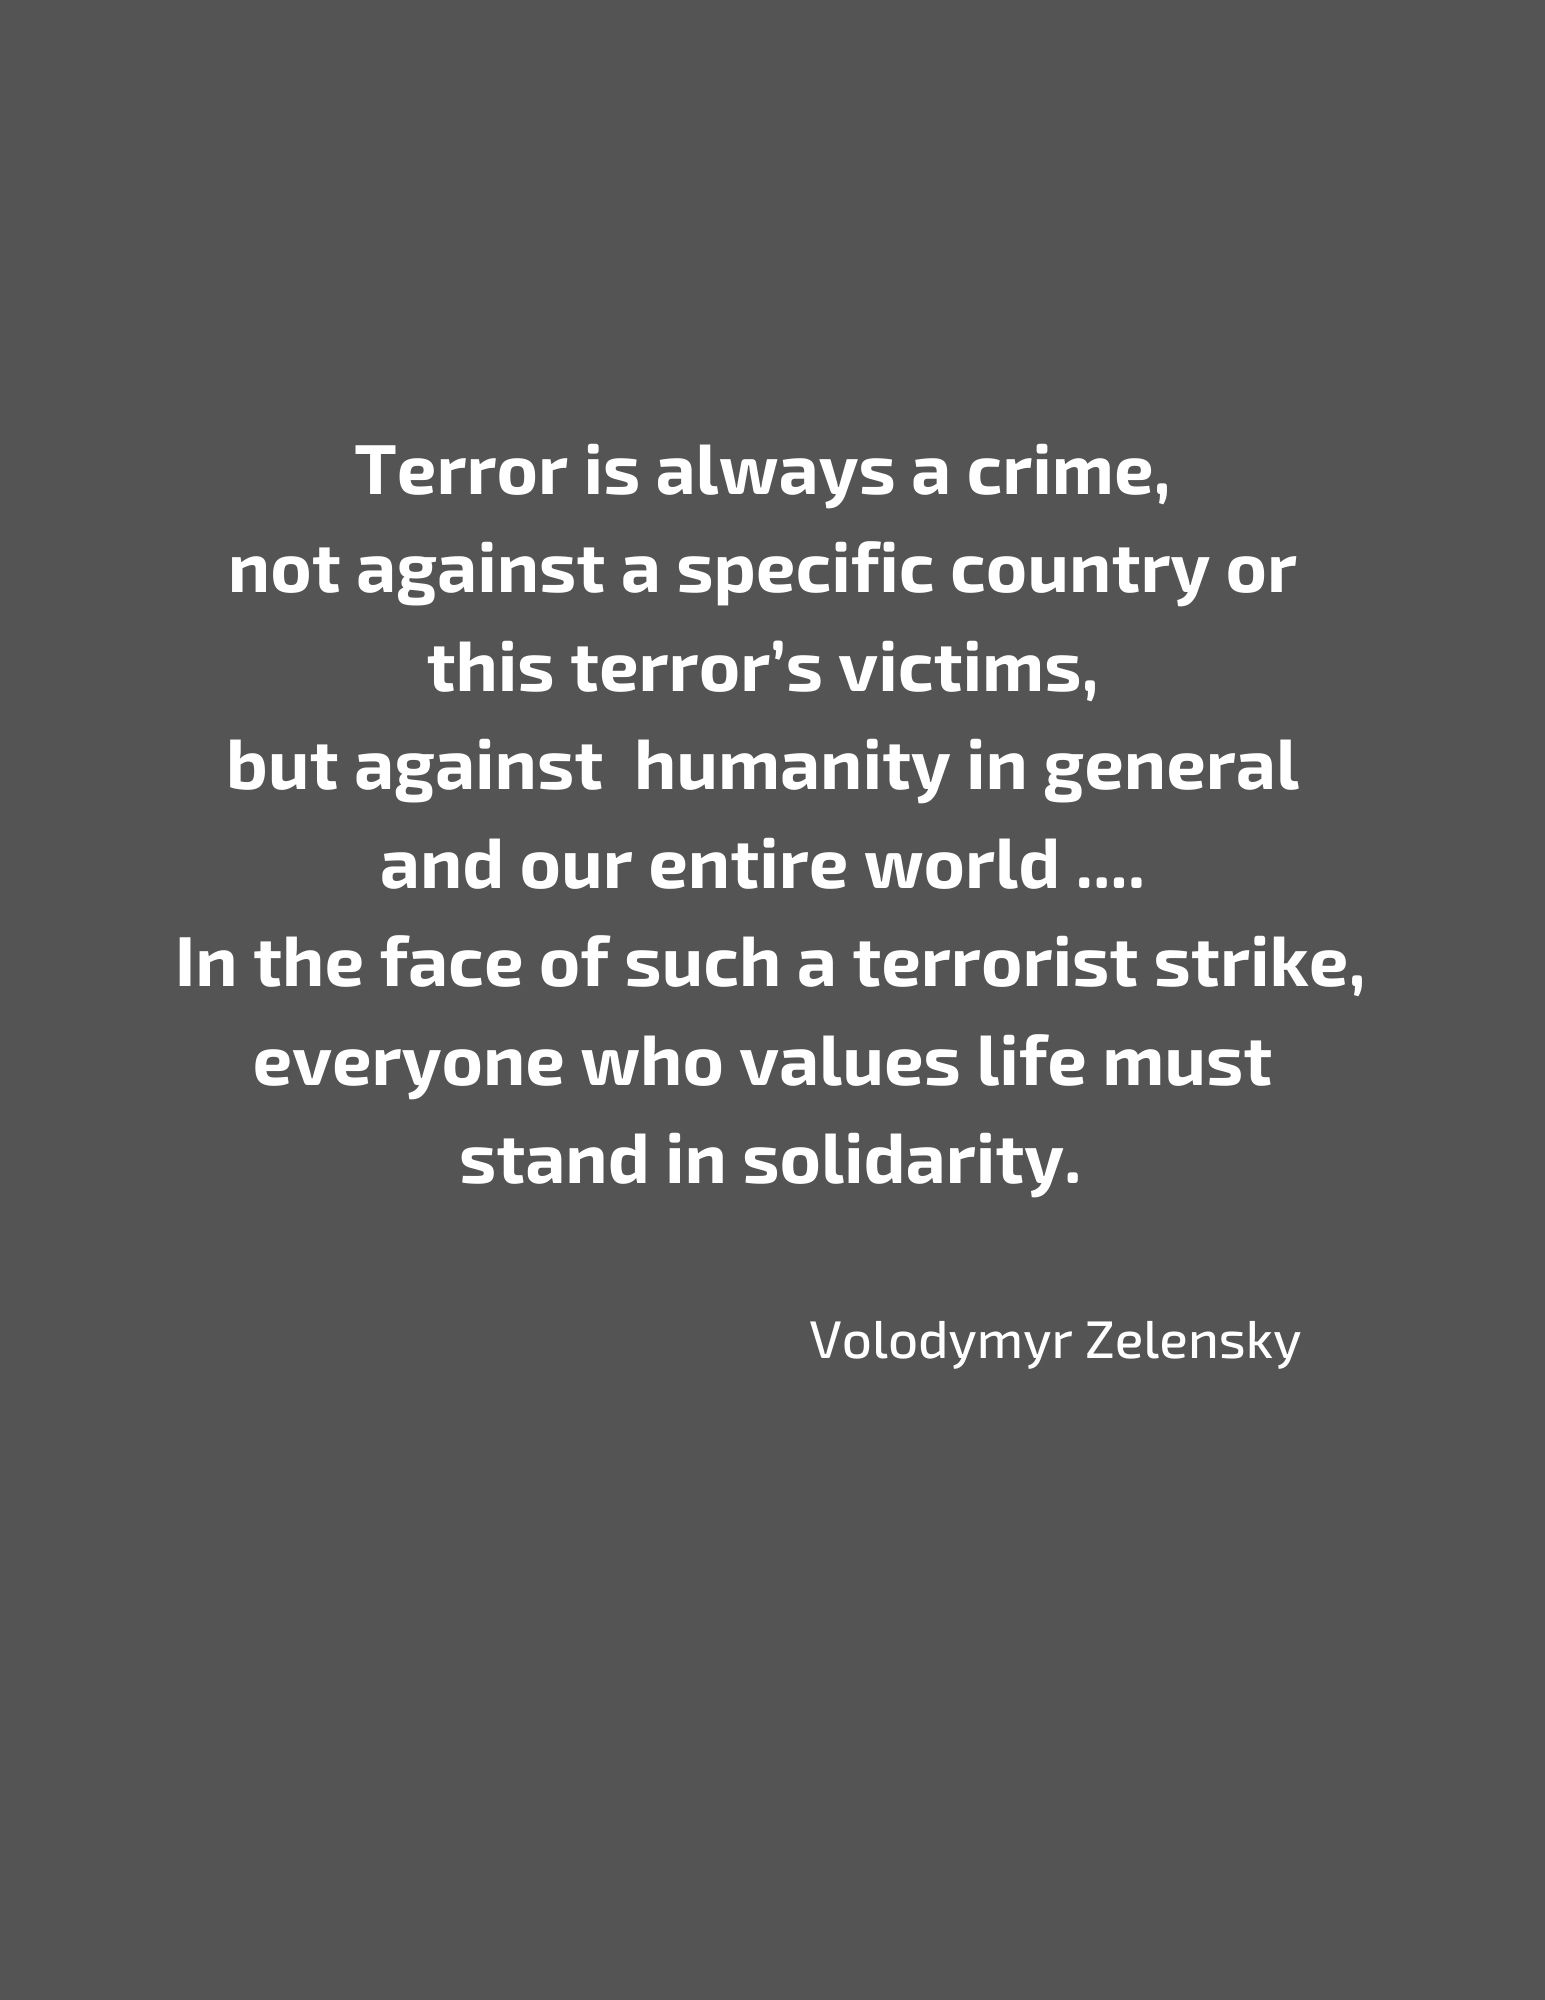 In Solidarity quote from Volodymyr Zelensky on grey background